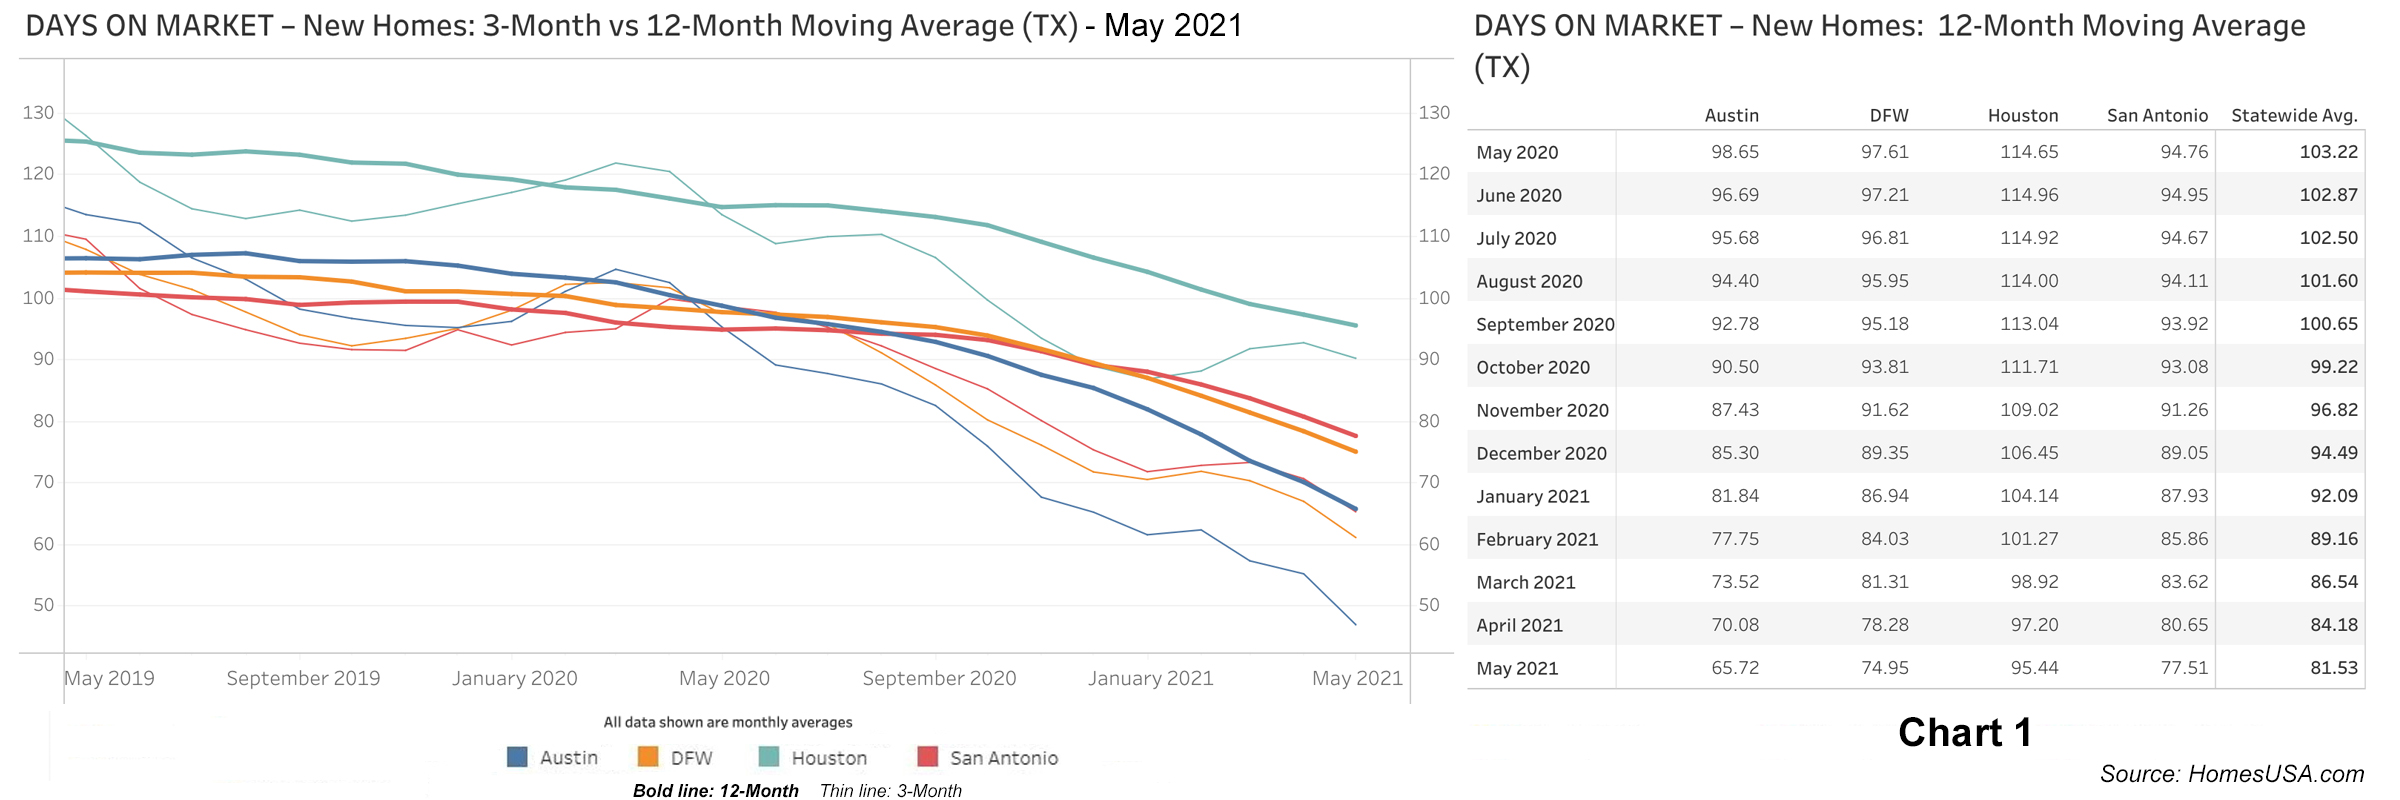 Chart 1: Texas New Homes: Days on Market - May 2021